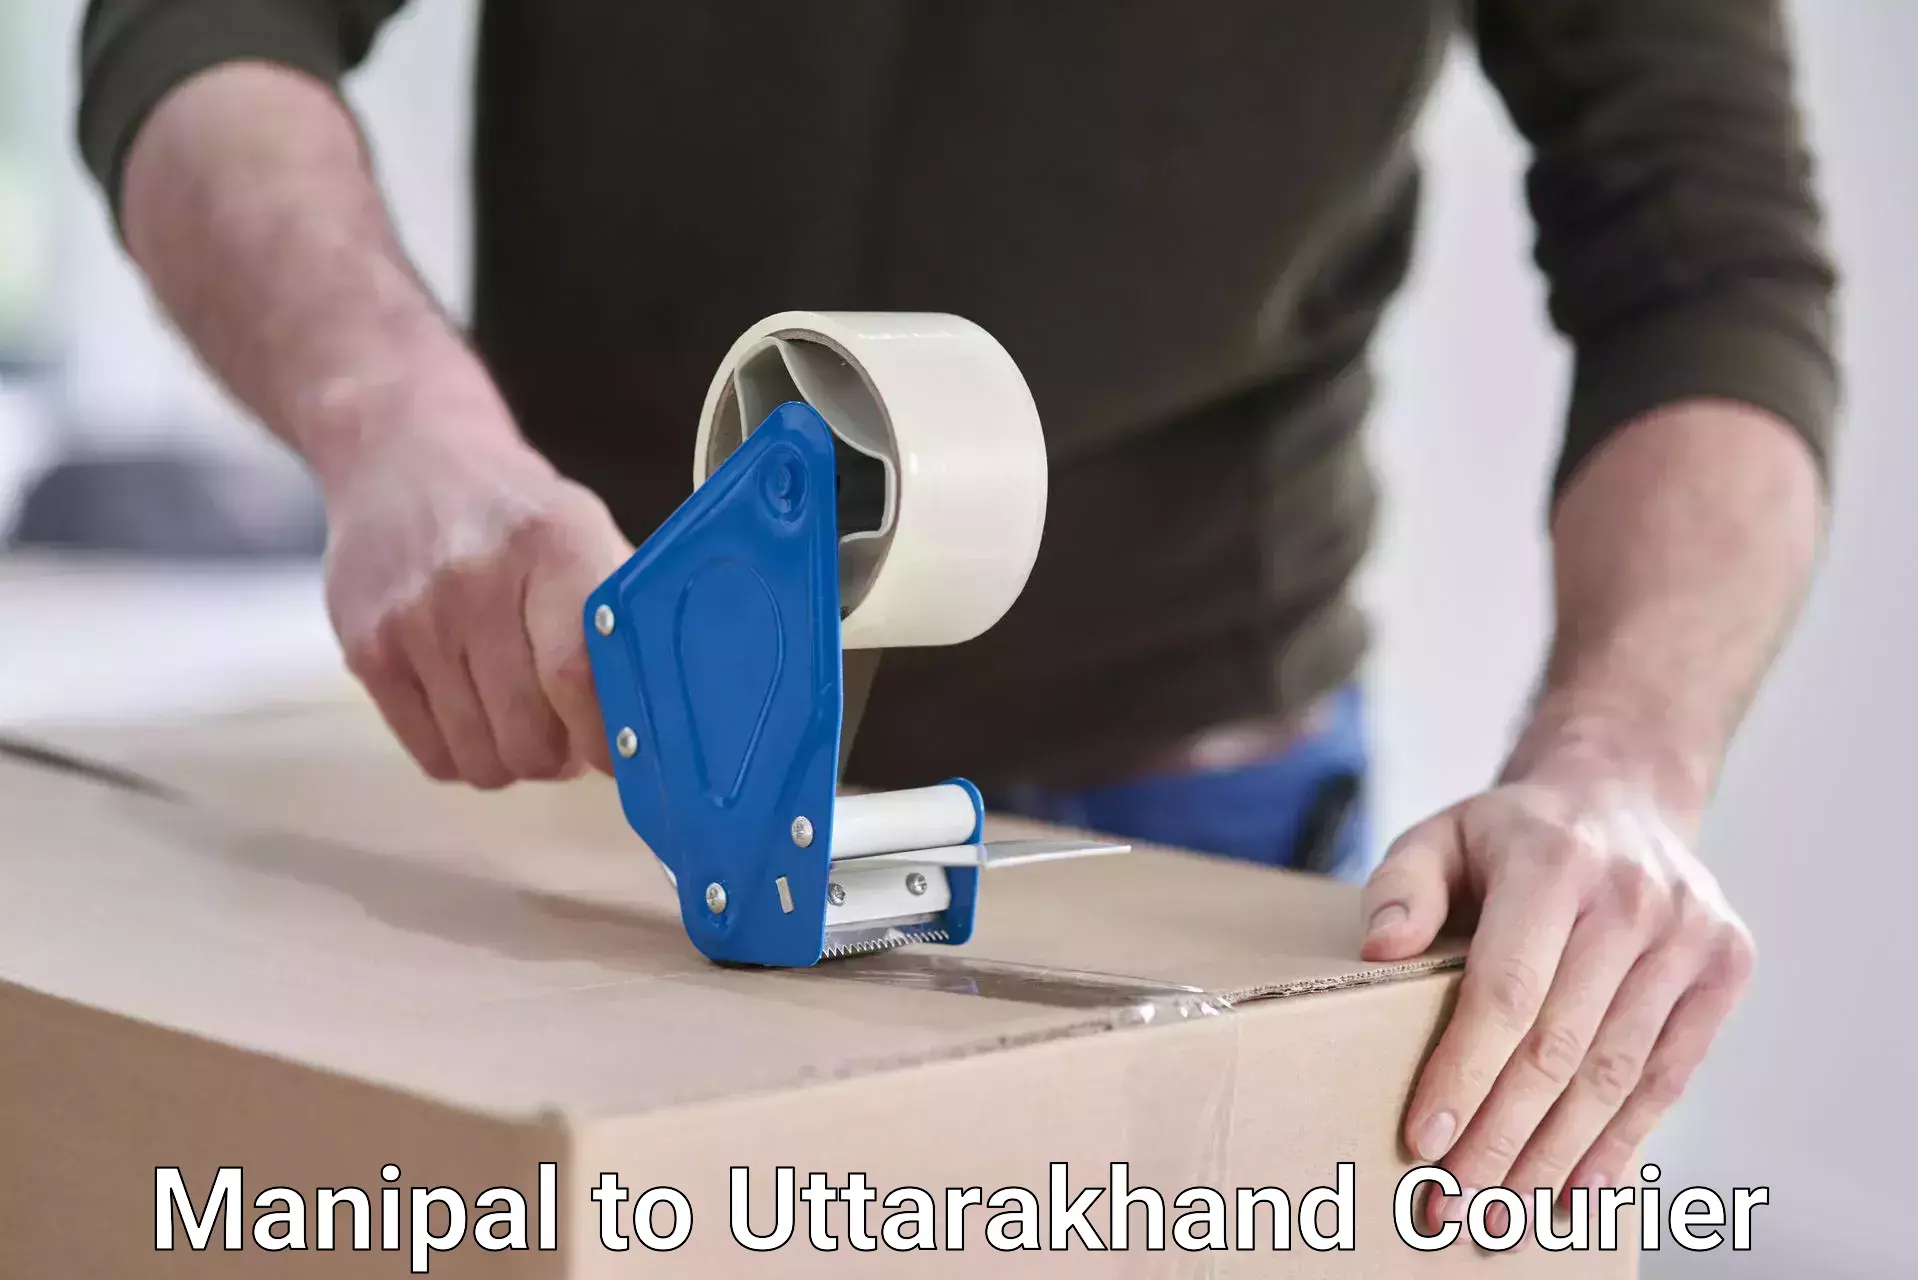 Courier service innovation Manipal to Uttarakhand